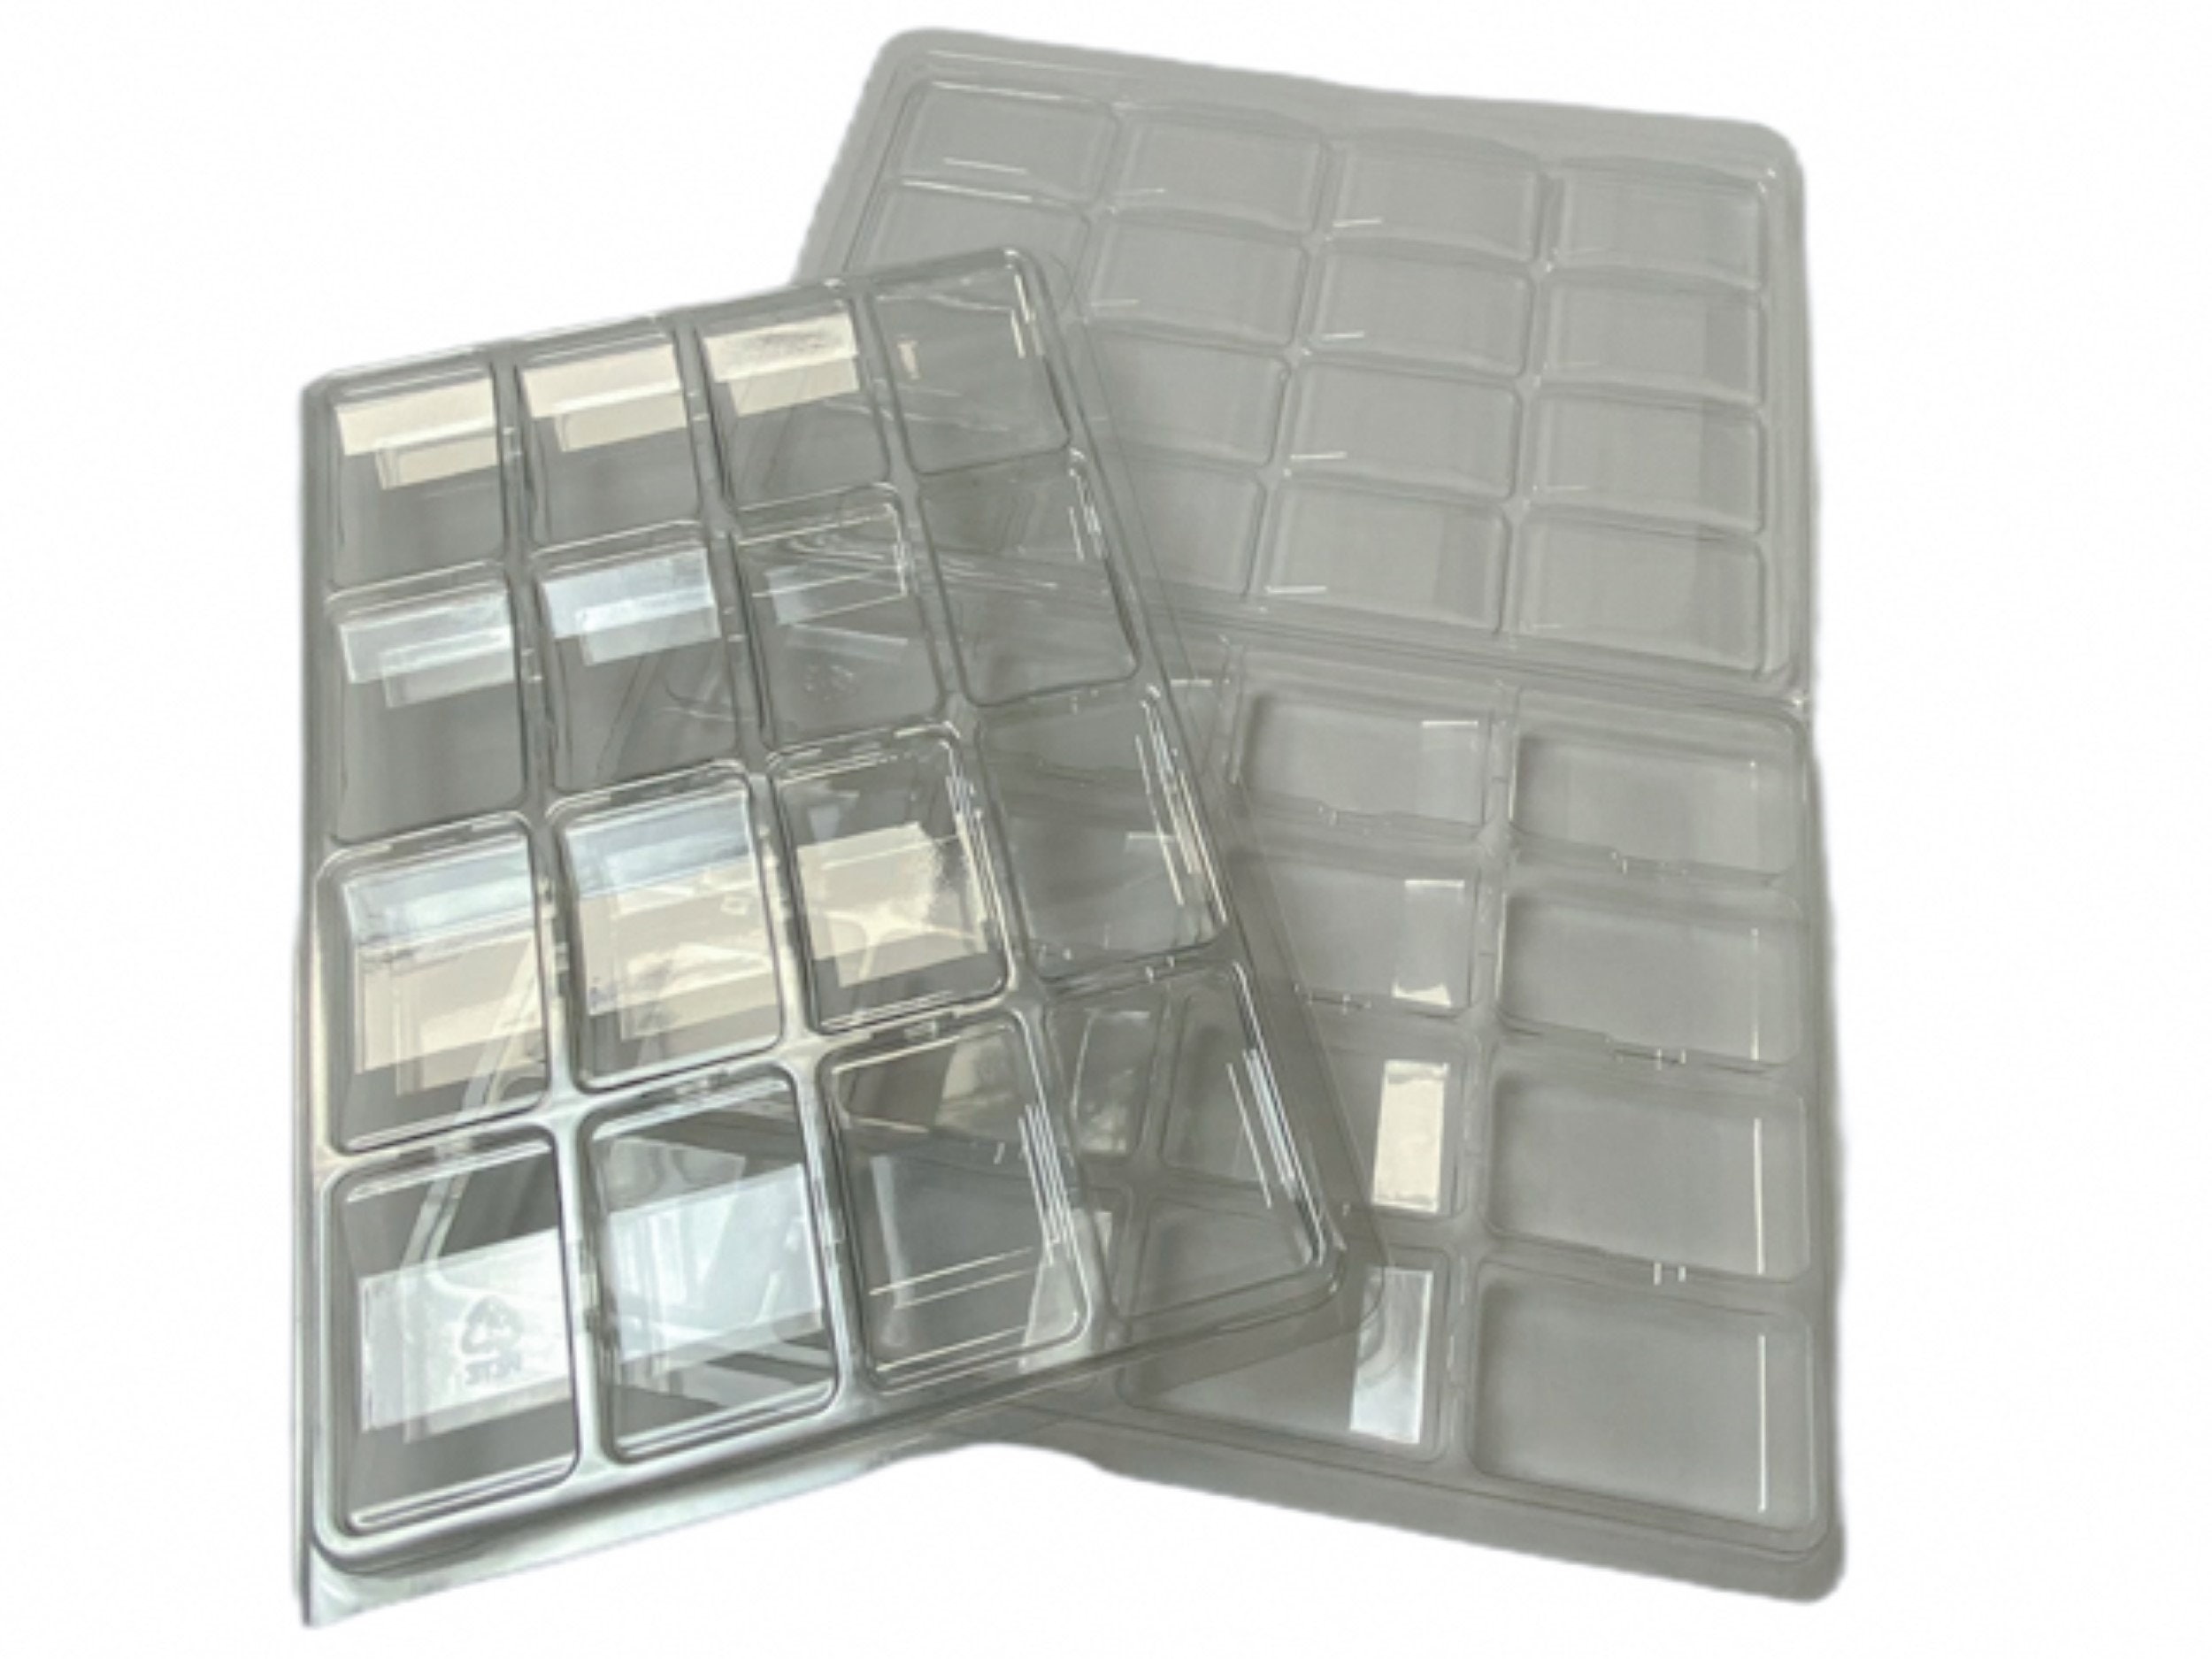 Bead Storage Solutions Plastic Stackable Organizer Tray Bundle with Lid and  39 Assorted Size Small and Medium Containers for Craft Supplies